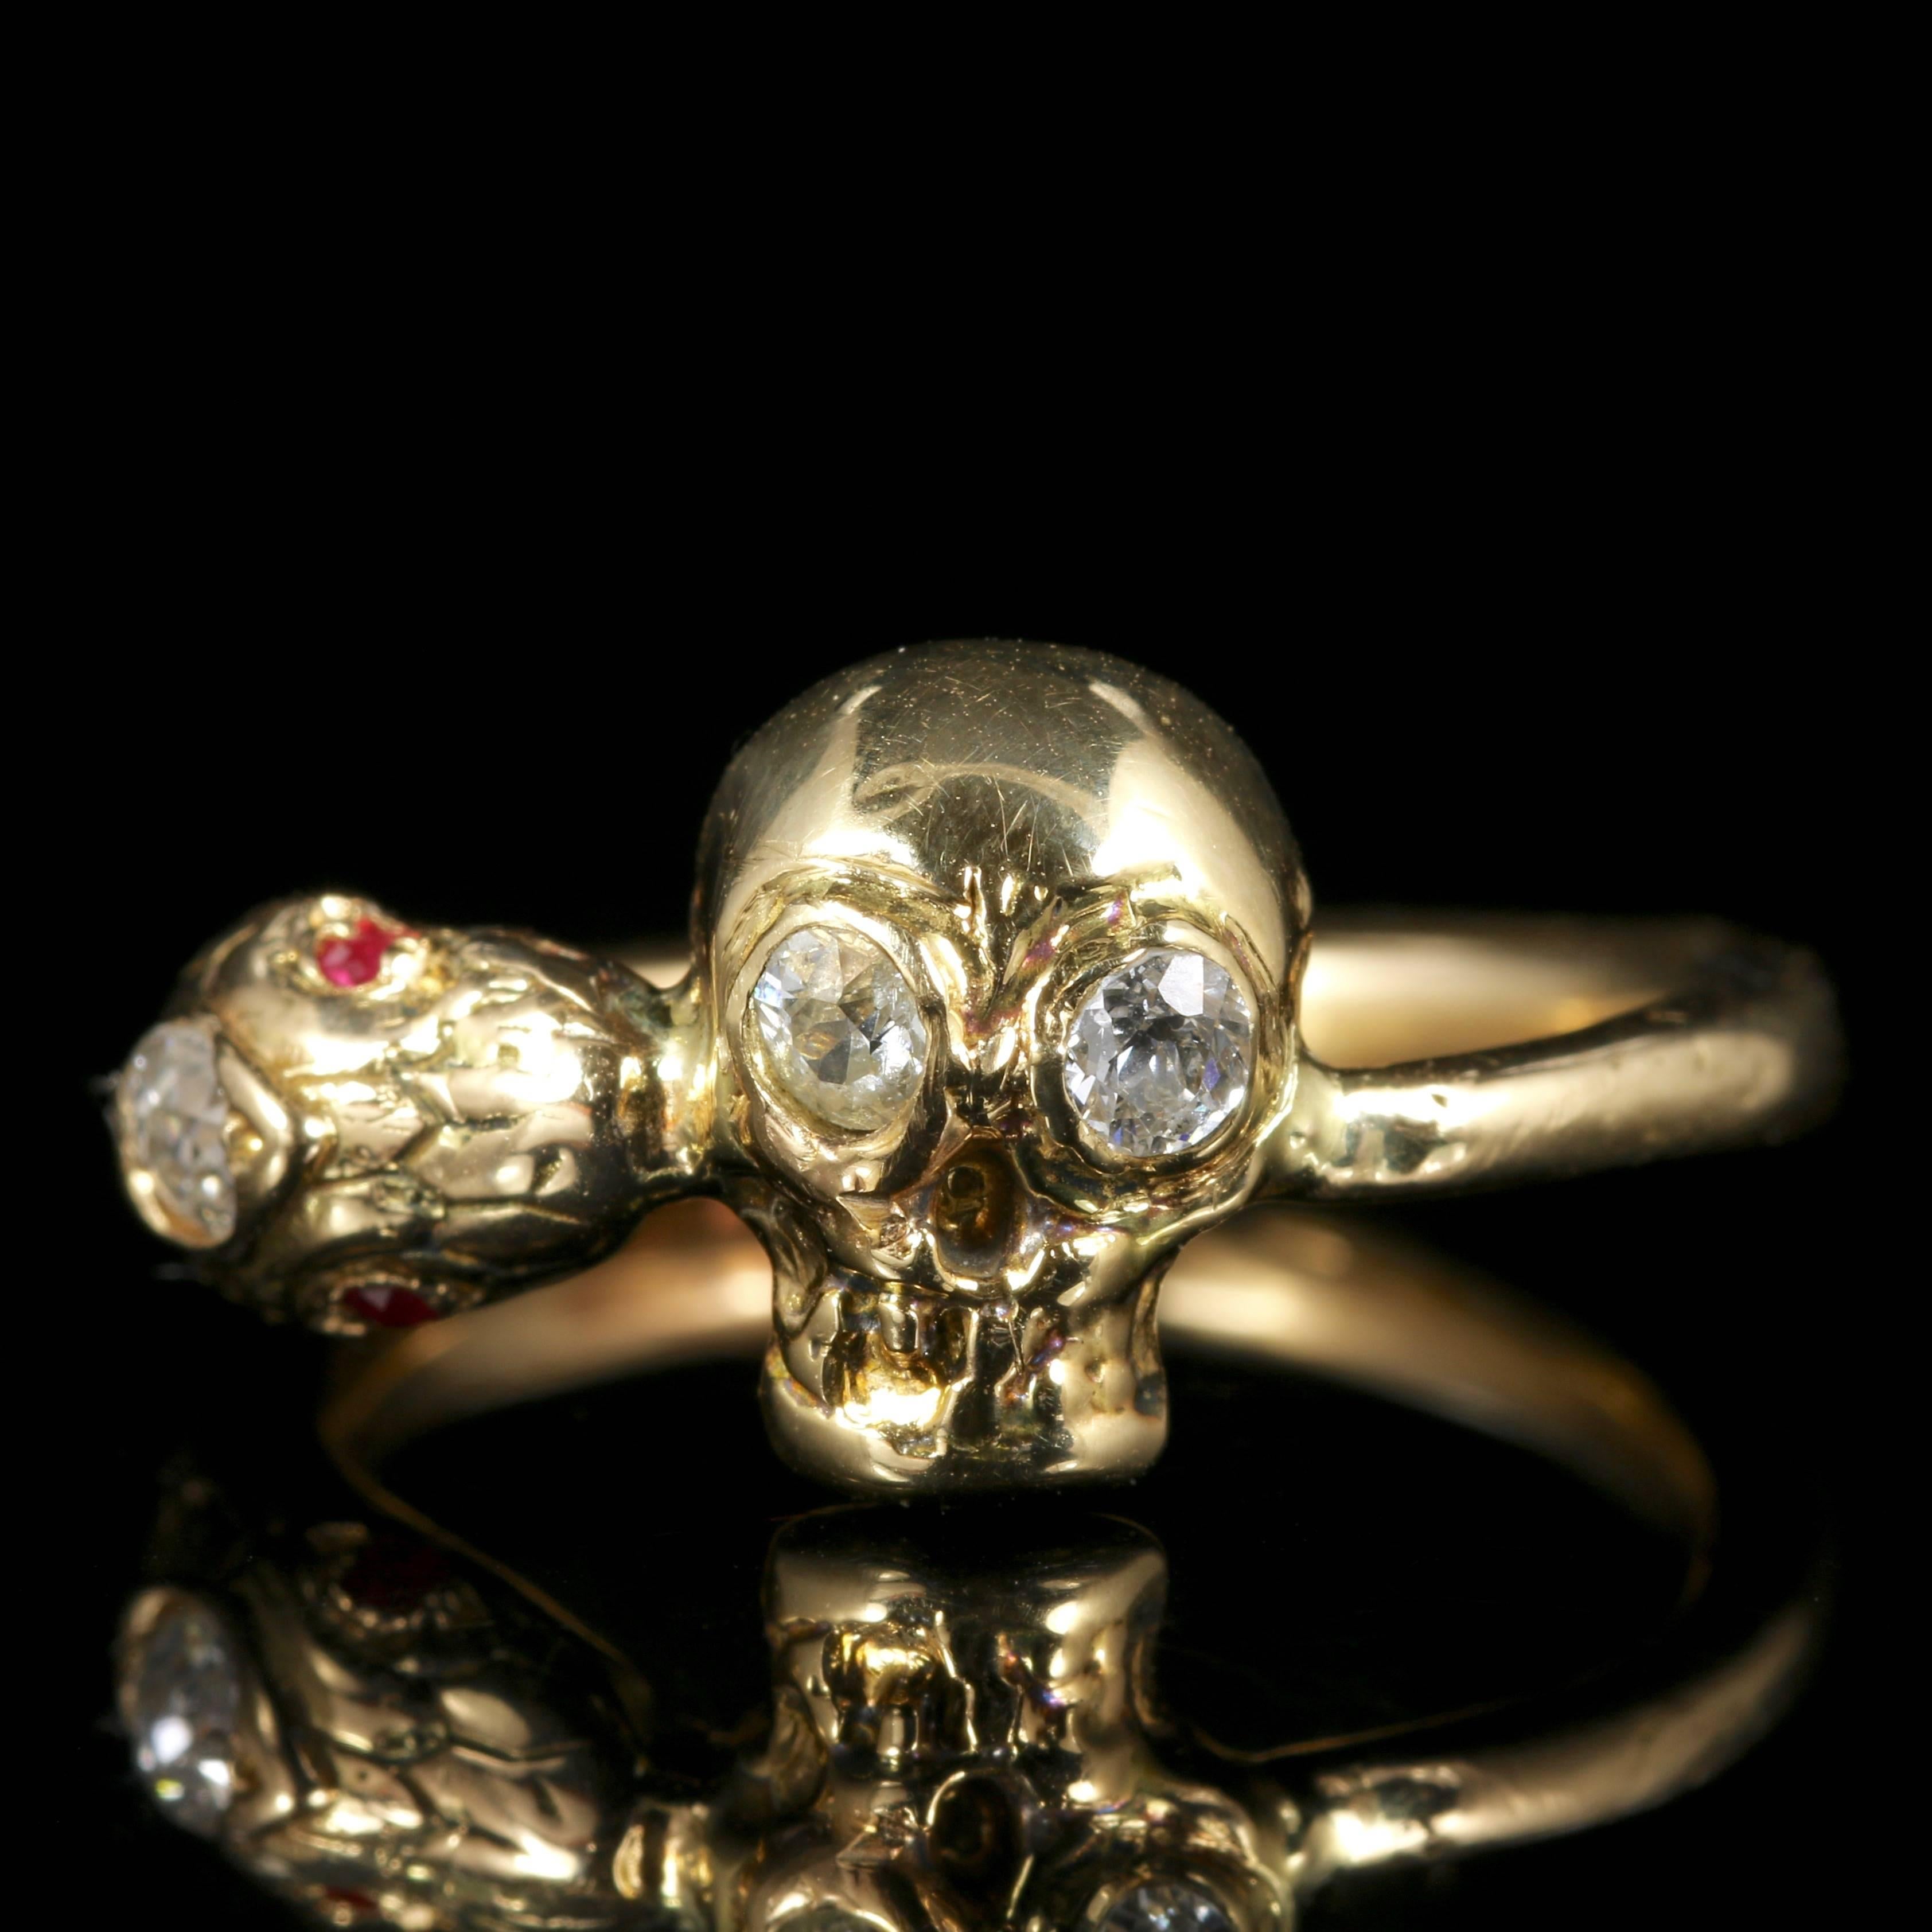 This fabulous 18ct Yellow Gold Memento Mori Diamond Skull and Snake ring is stunning.

Skull jewellery (Memento Mori) is very collectable. 

Memento Mori means -Remember that you must die- and to cherish each day as it is a reminder of the imminence